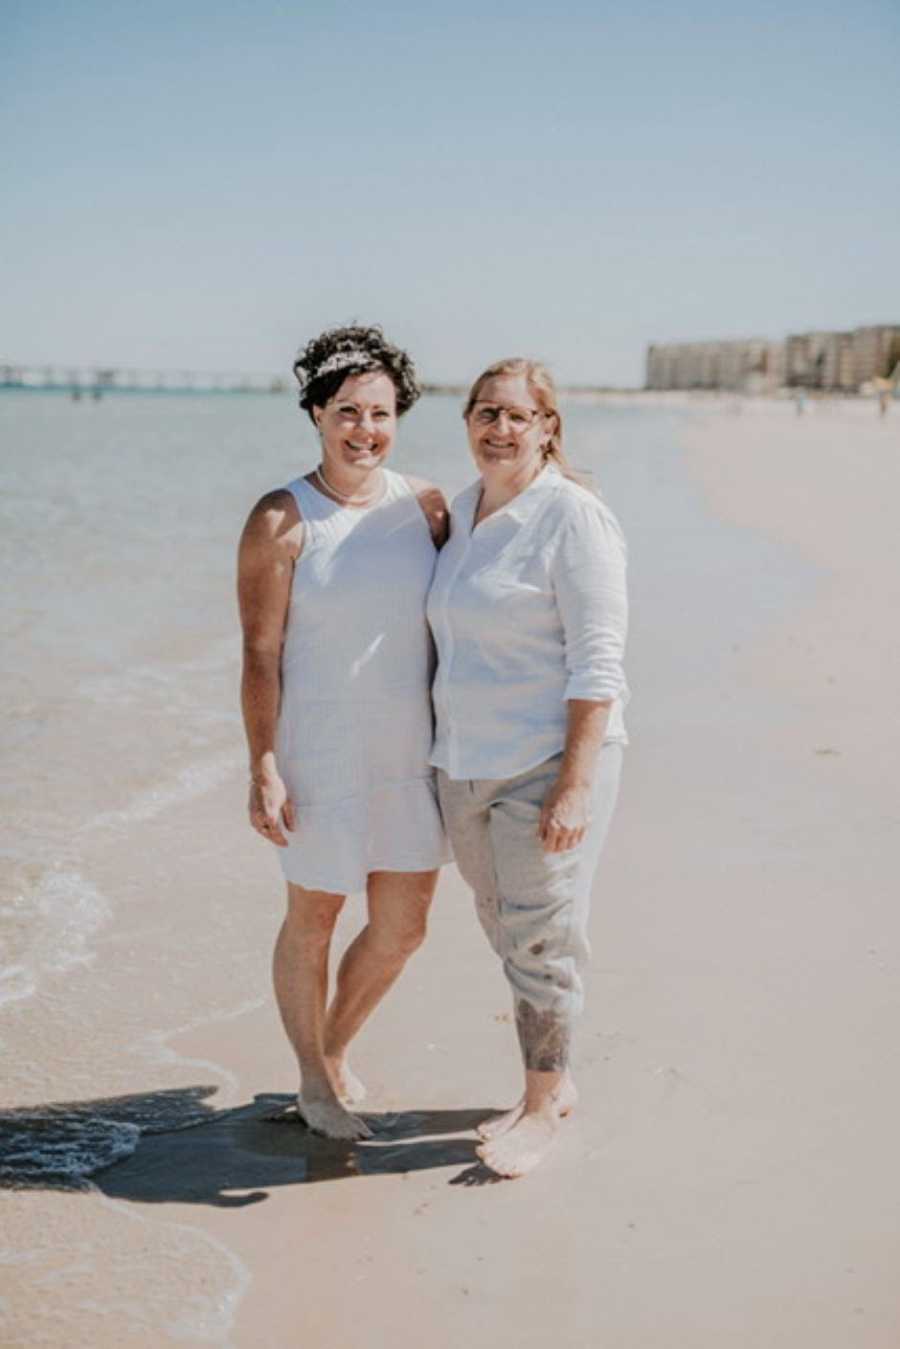 Lesbian couple get married on the beach, surrounded by their closest friends and family